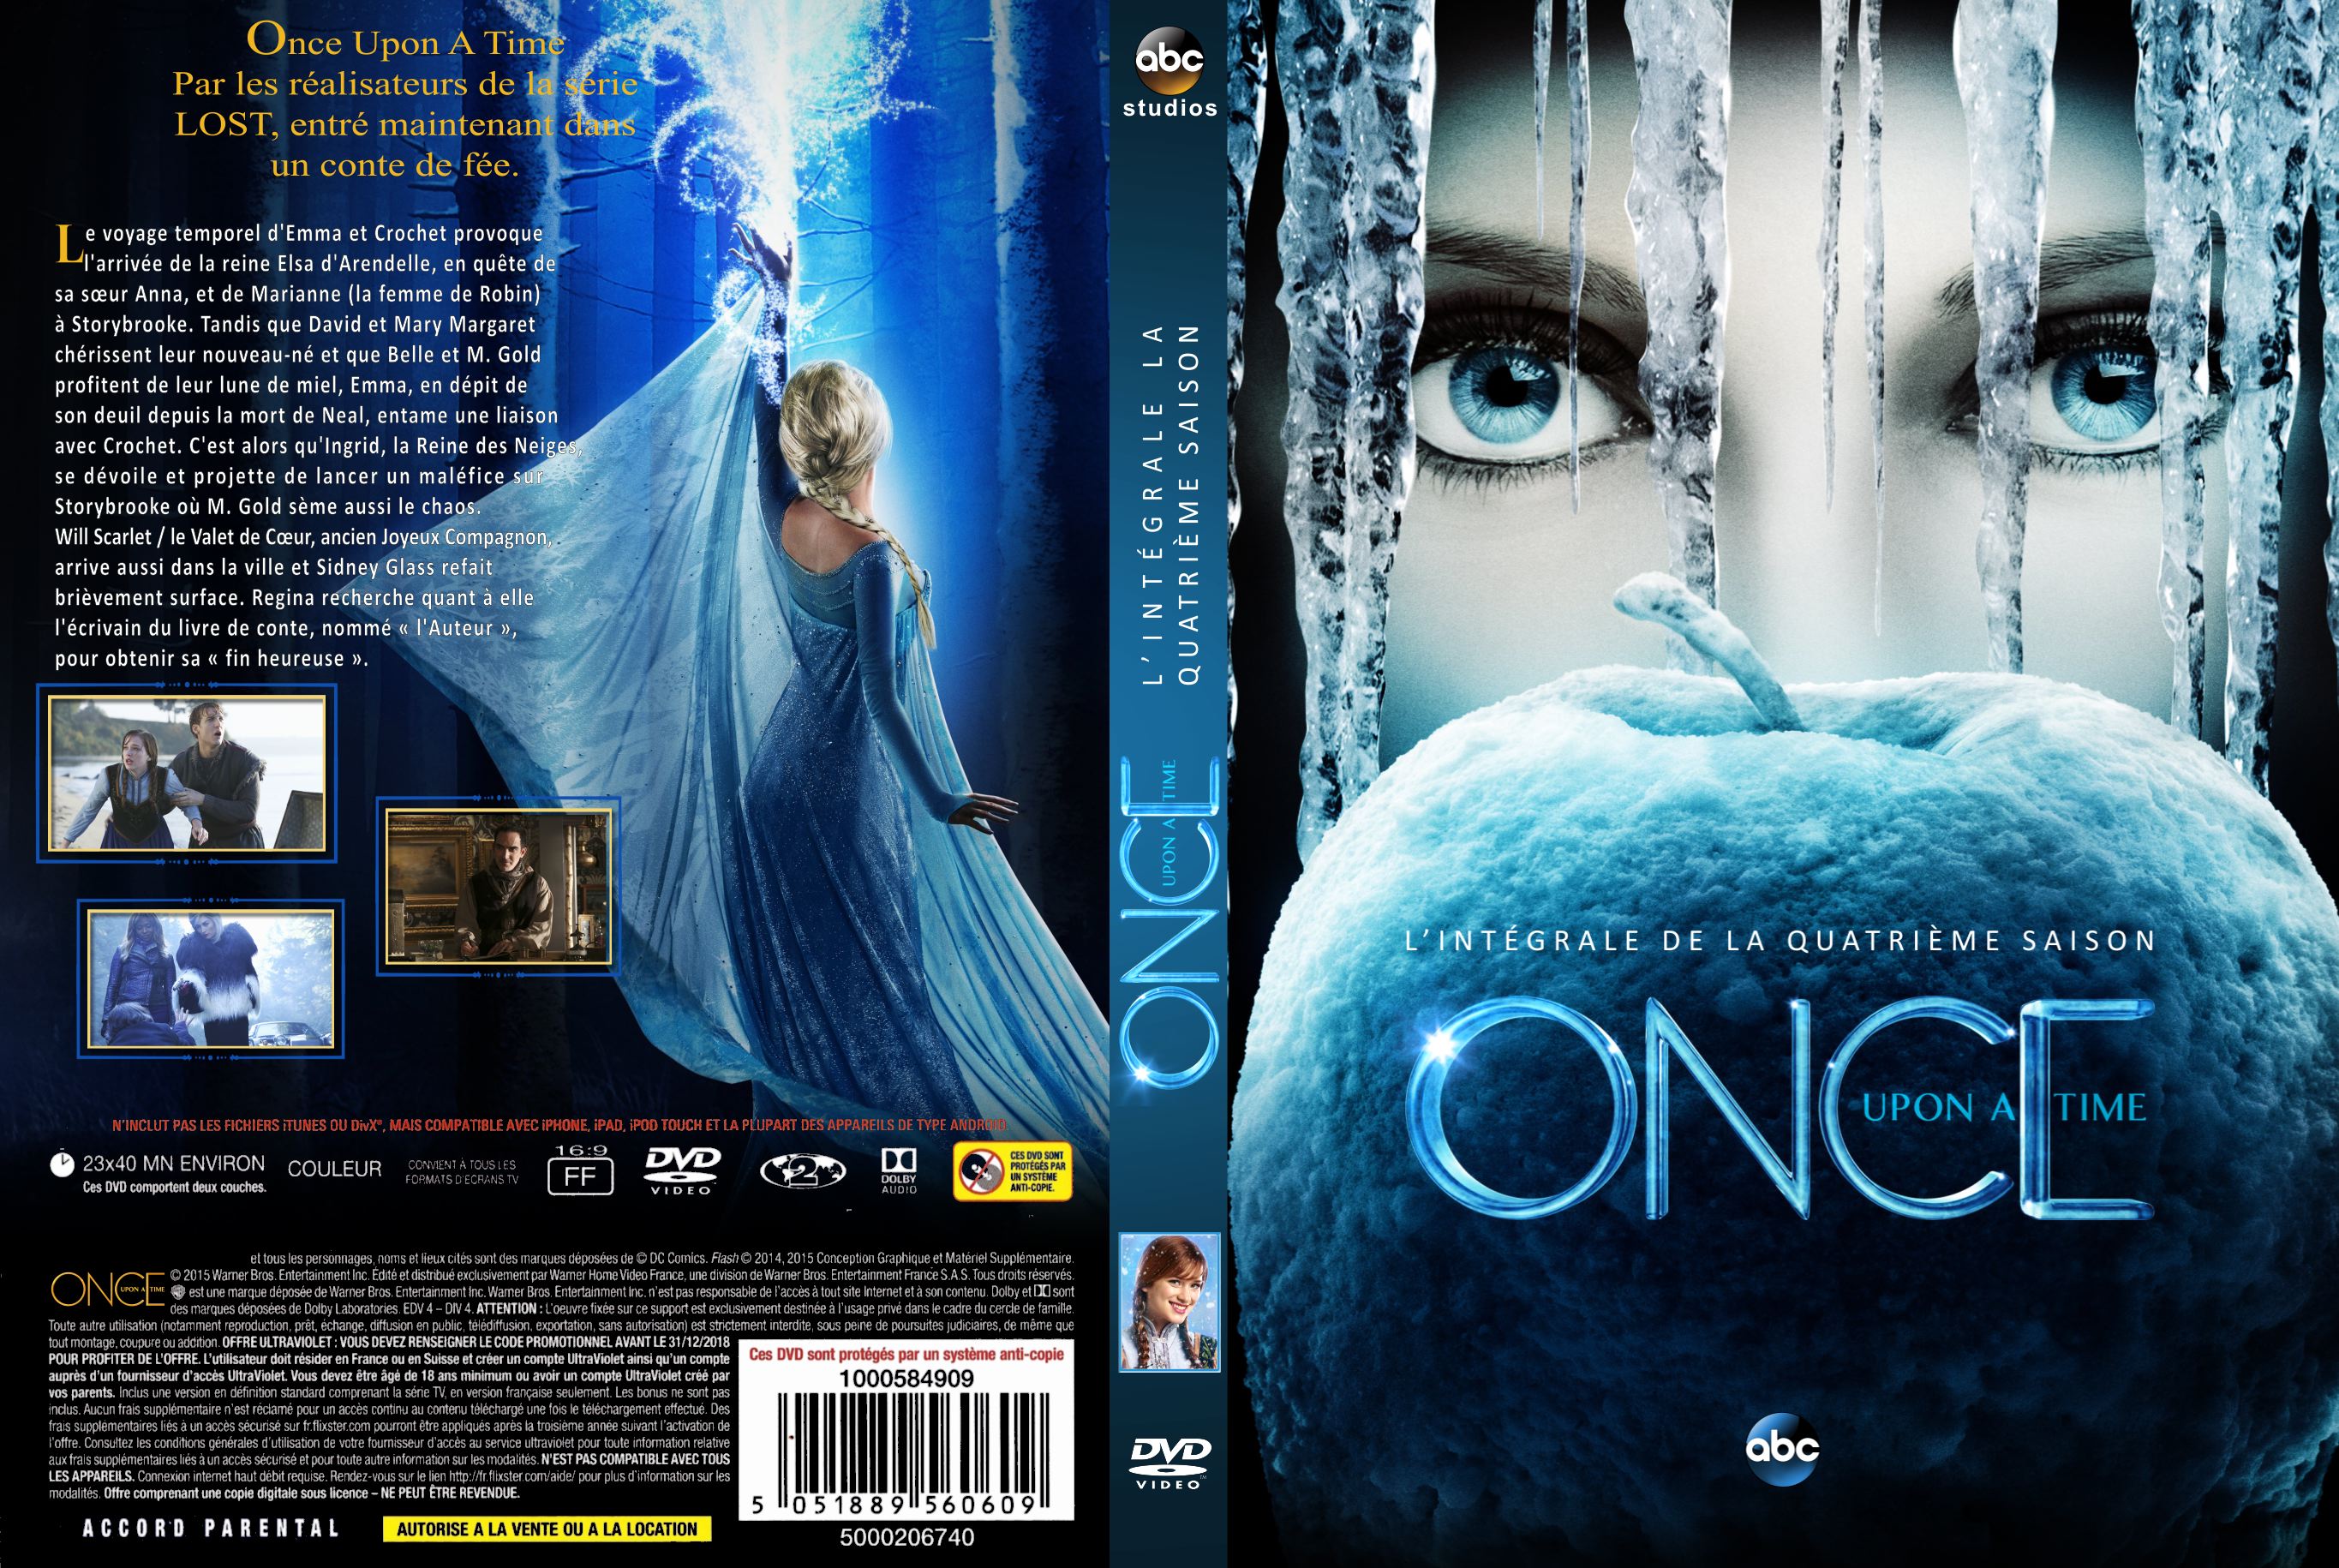 Jaquette DVD Once Upon a Time saison 4 custom